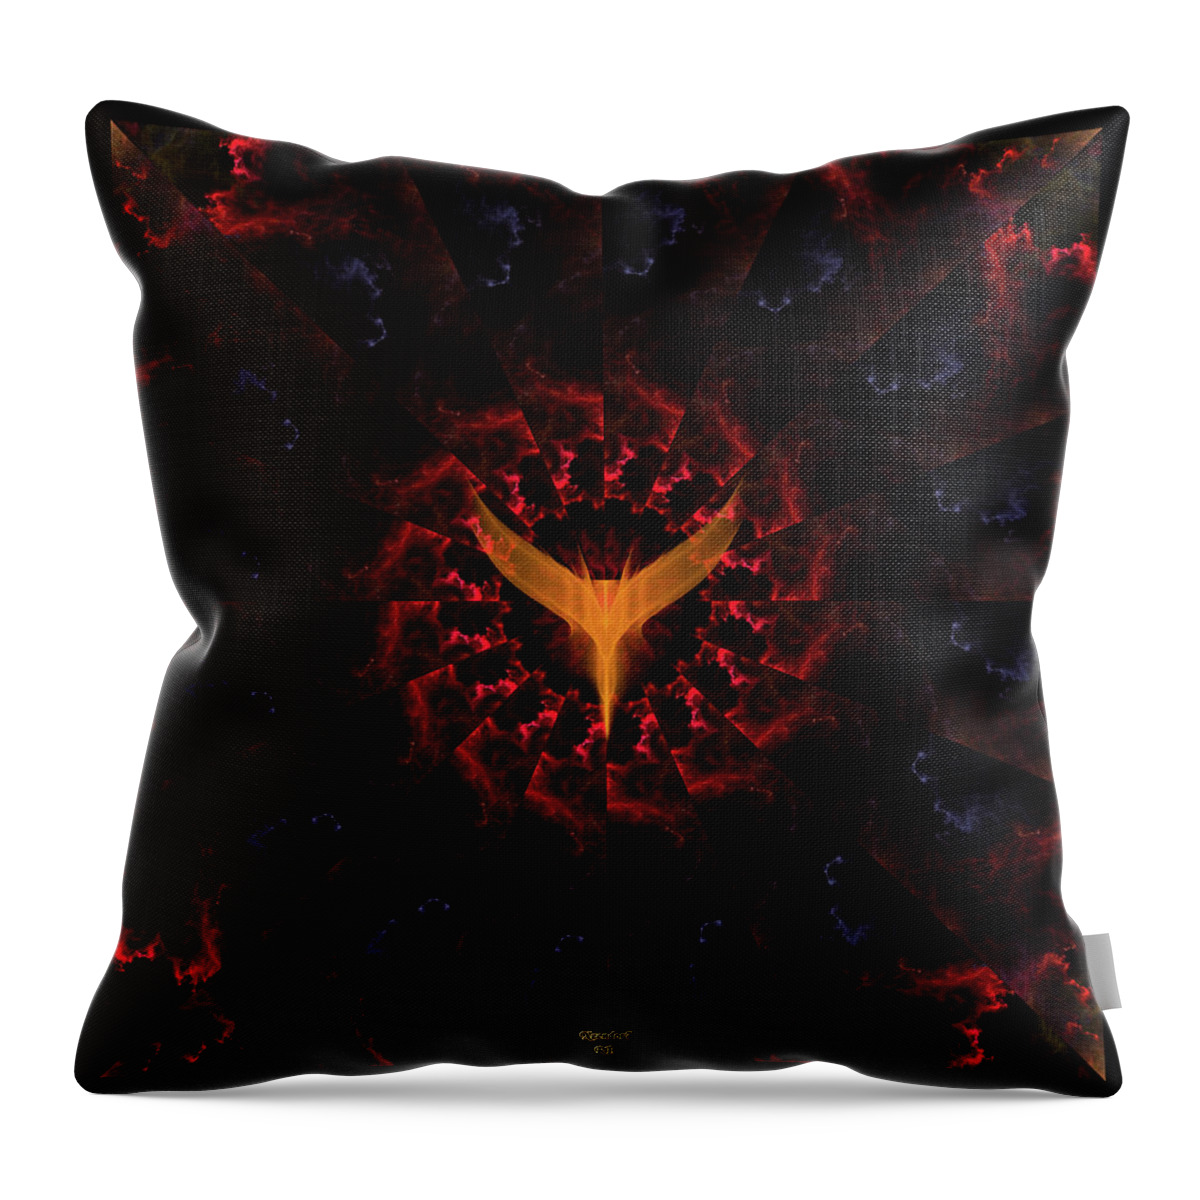 Clouds Of Fire Throw Pillow featuring the digital art Clouds Of Fire On Brick Mural by Rolando Burbon